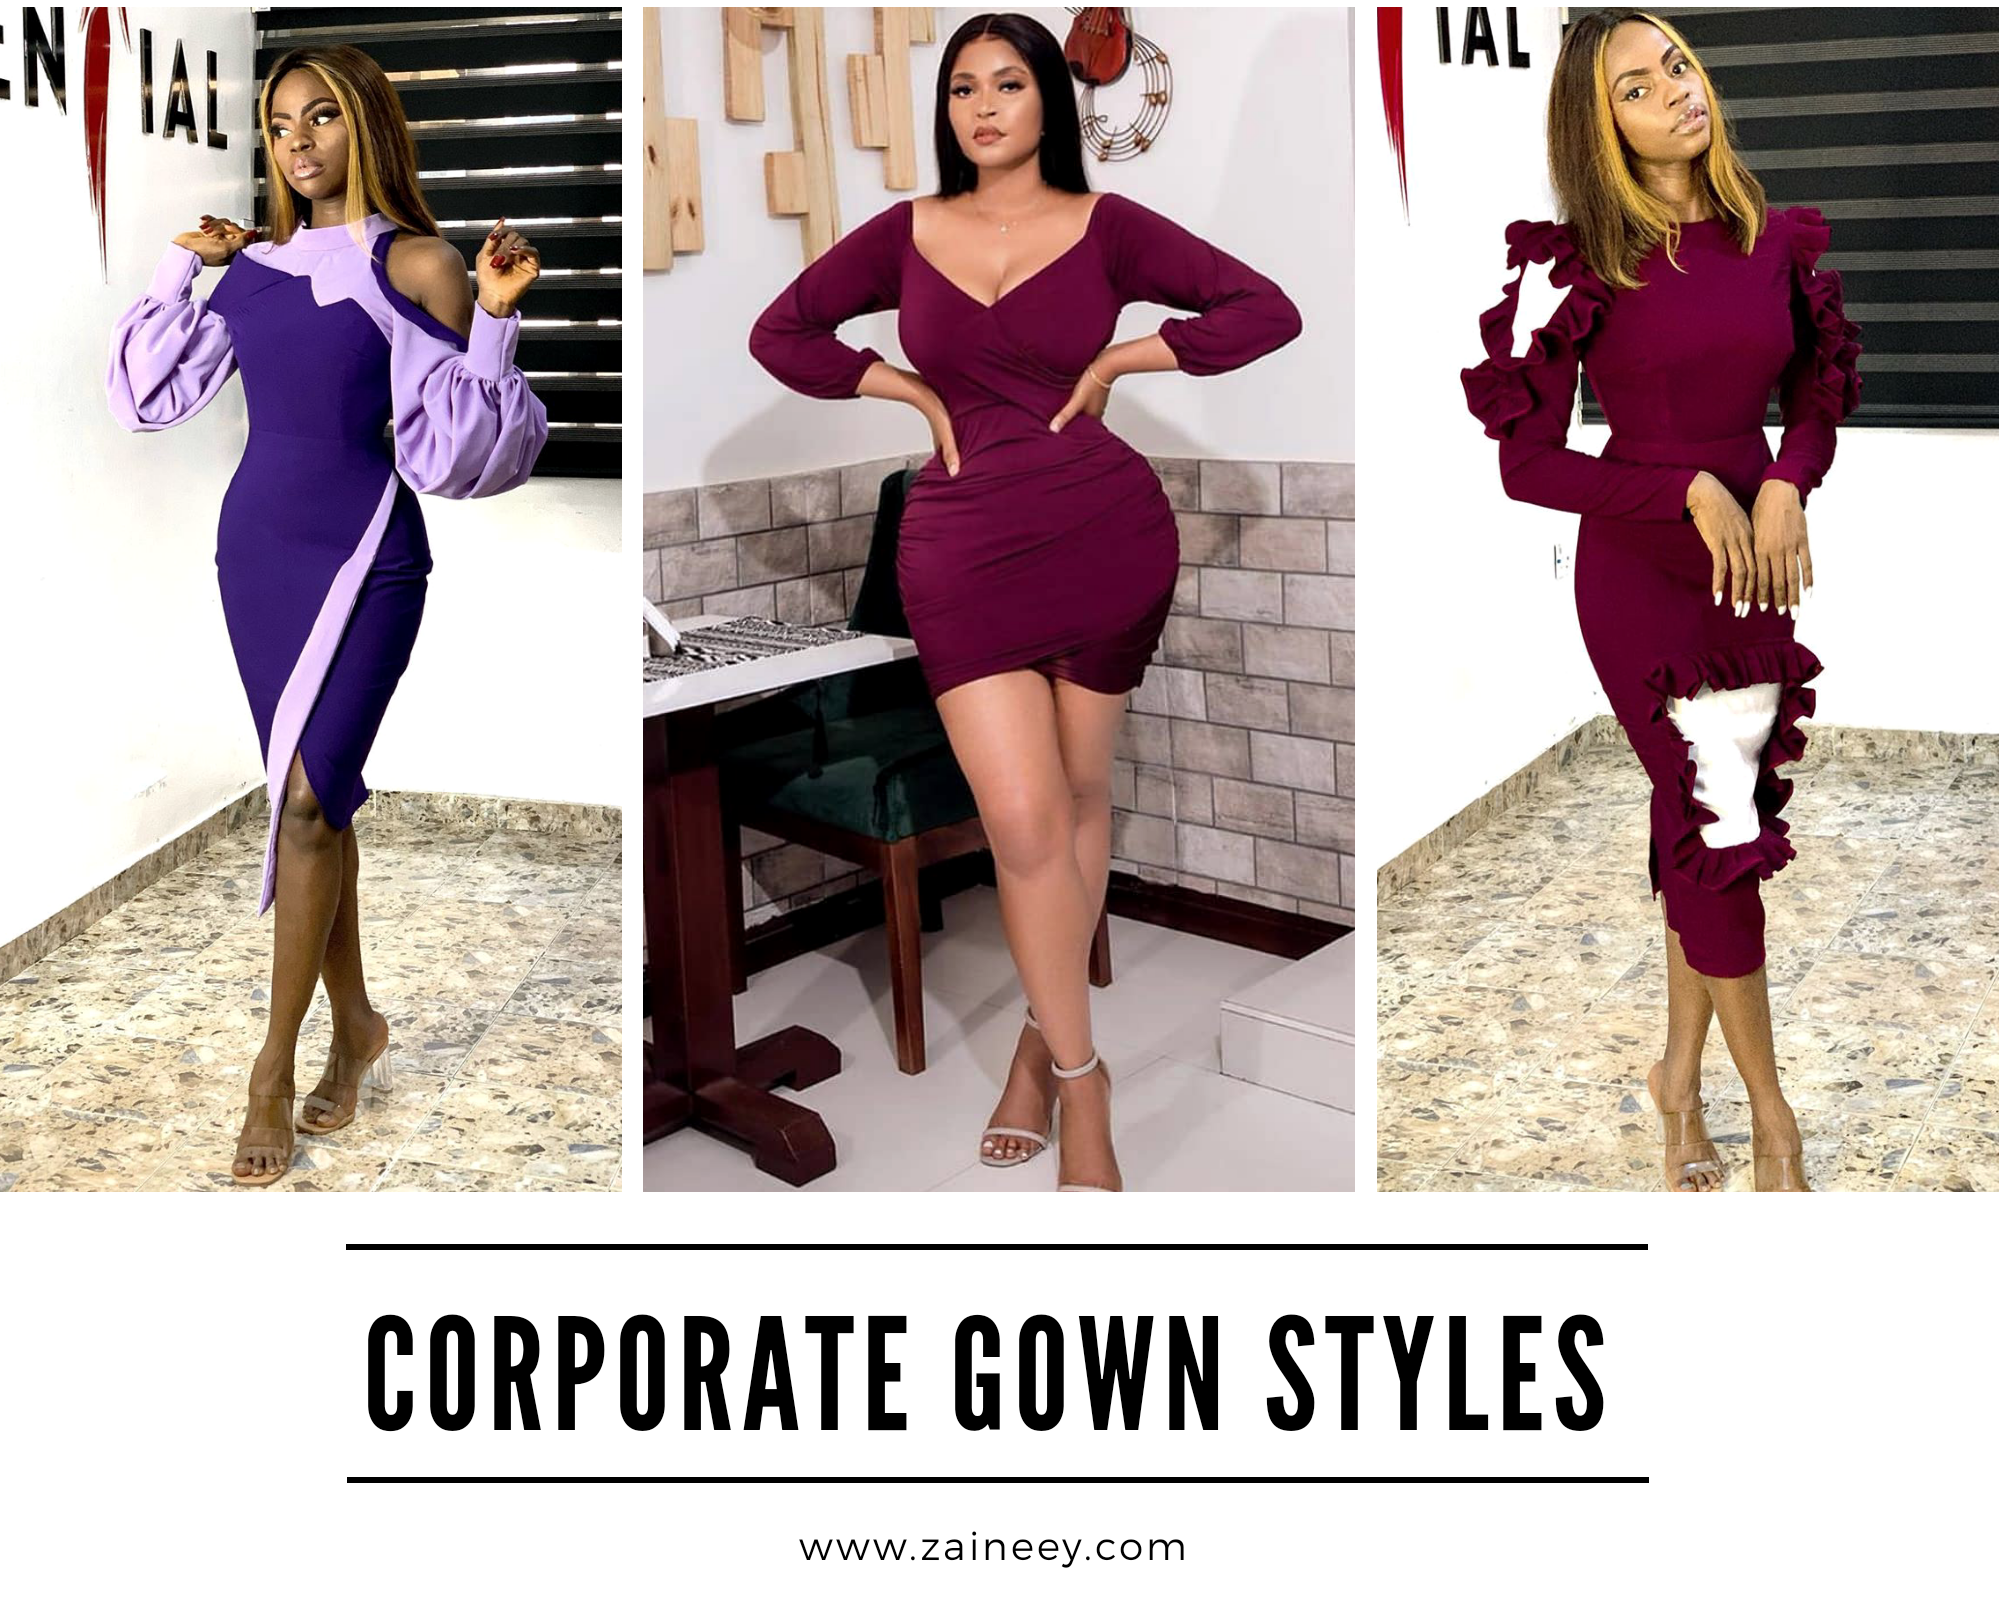 Corporate Gown Styles: Latest Corporate Gown Styles for Ladies 